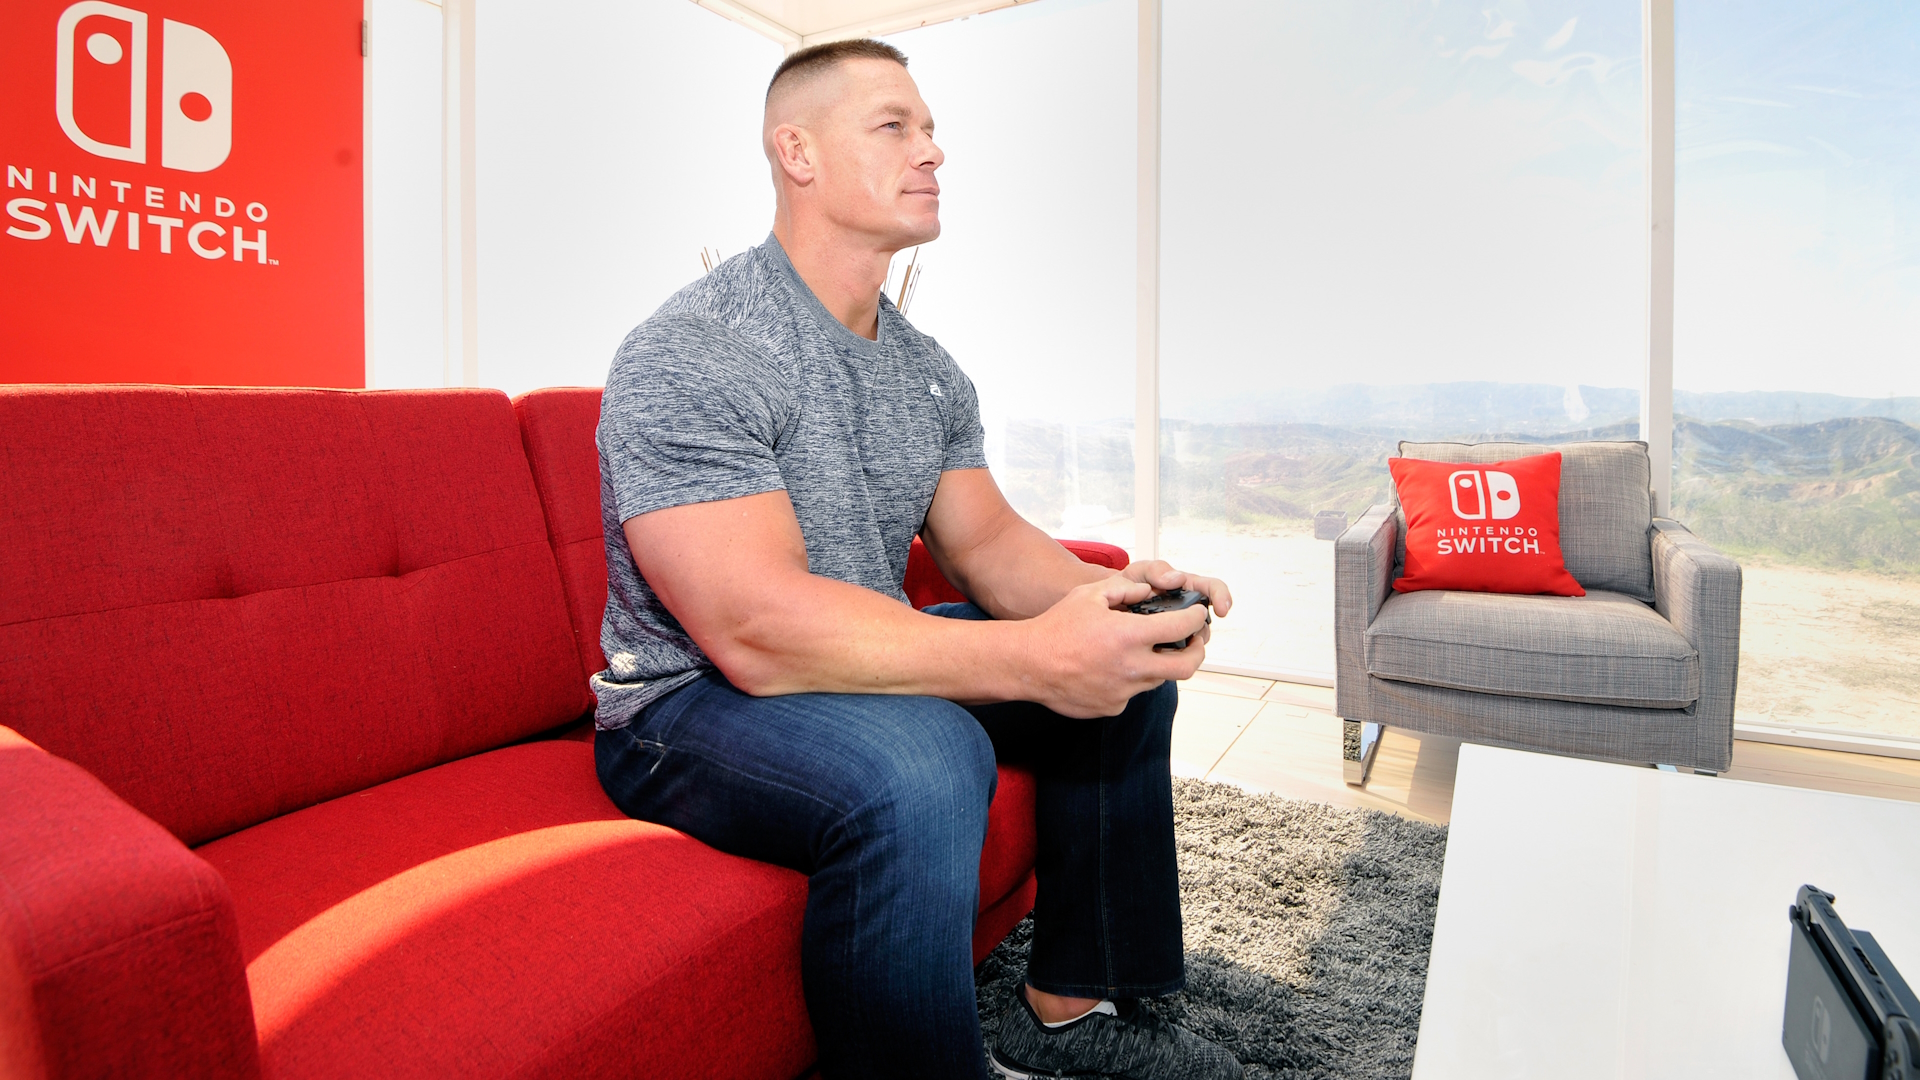 John Cena sits in a Nintendo Switch-themed room playing a Nintendo Switch